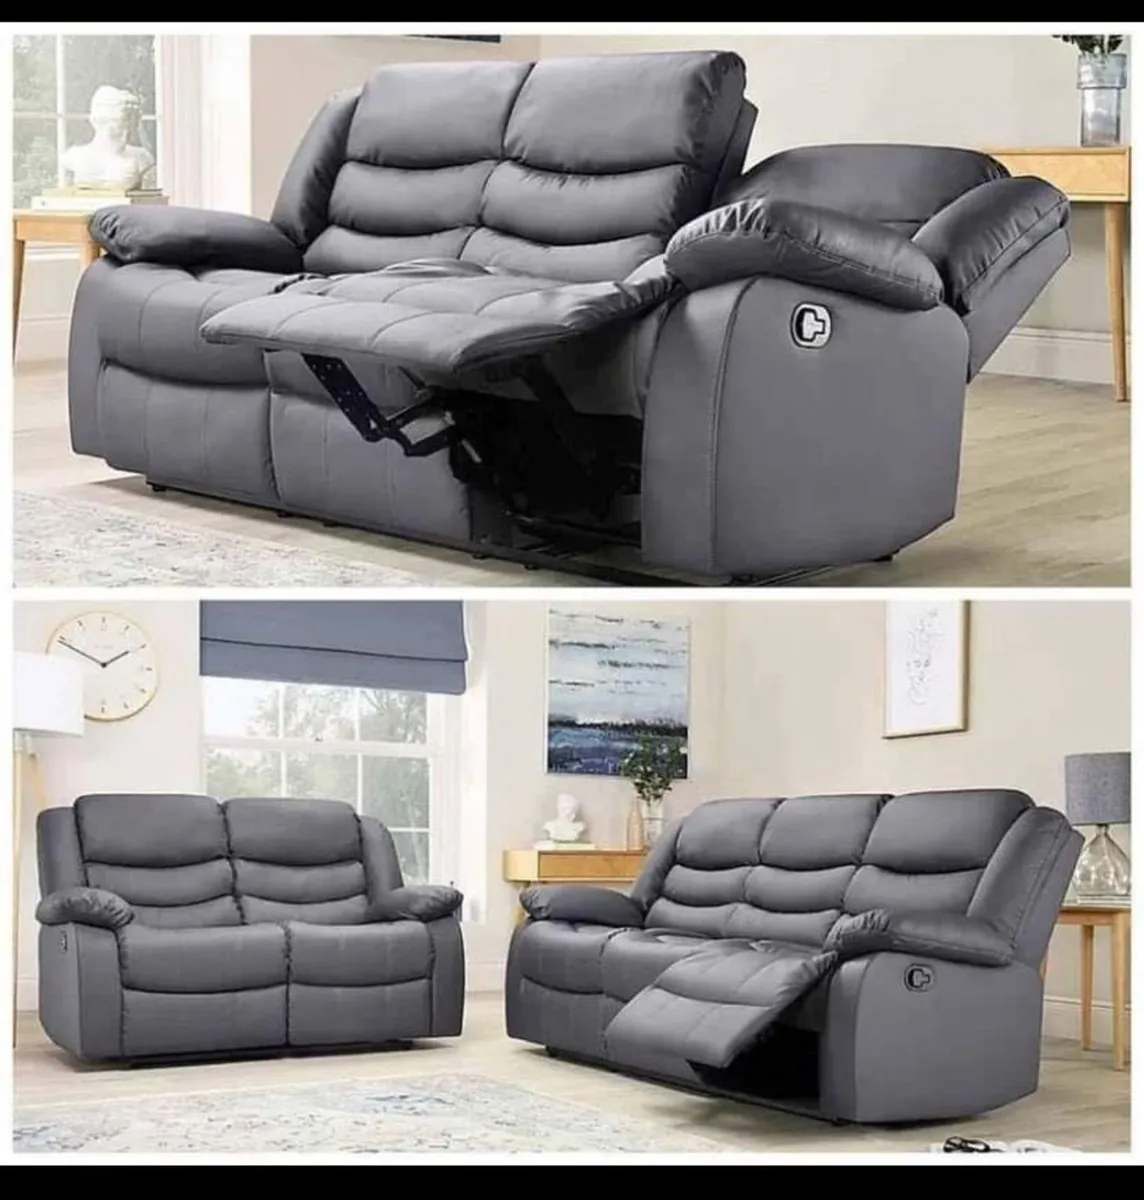 New 3+2 seater sofa available